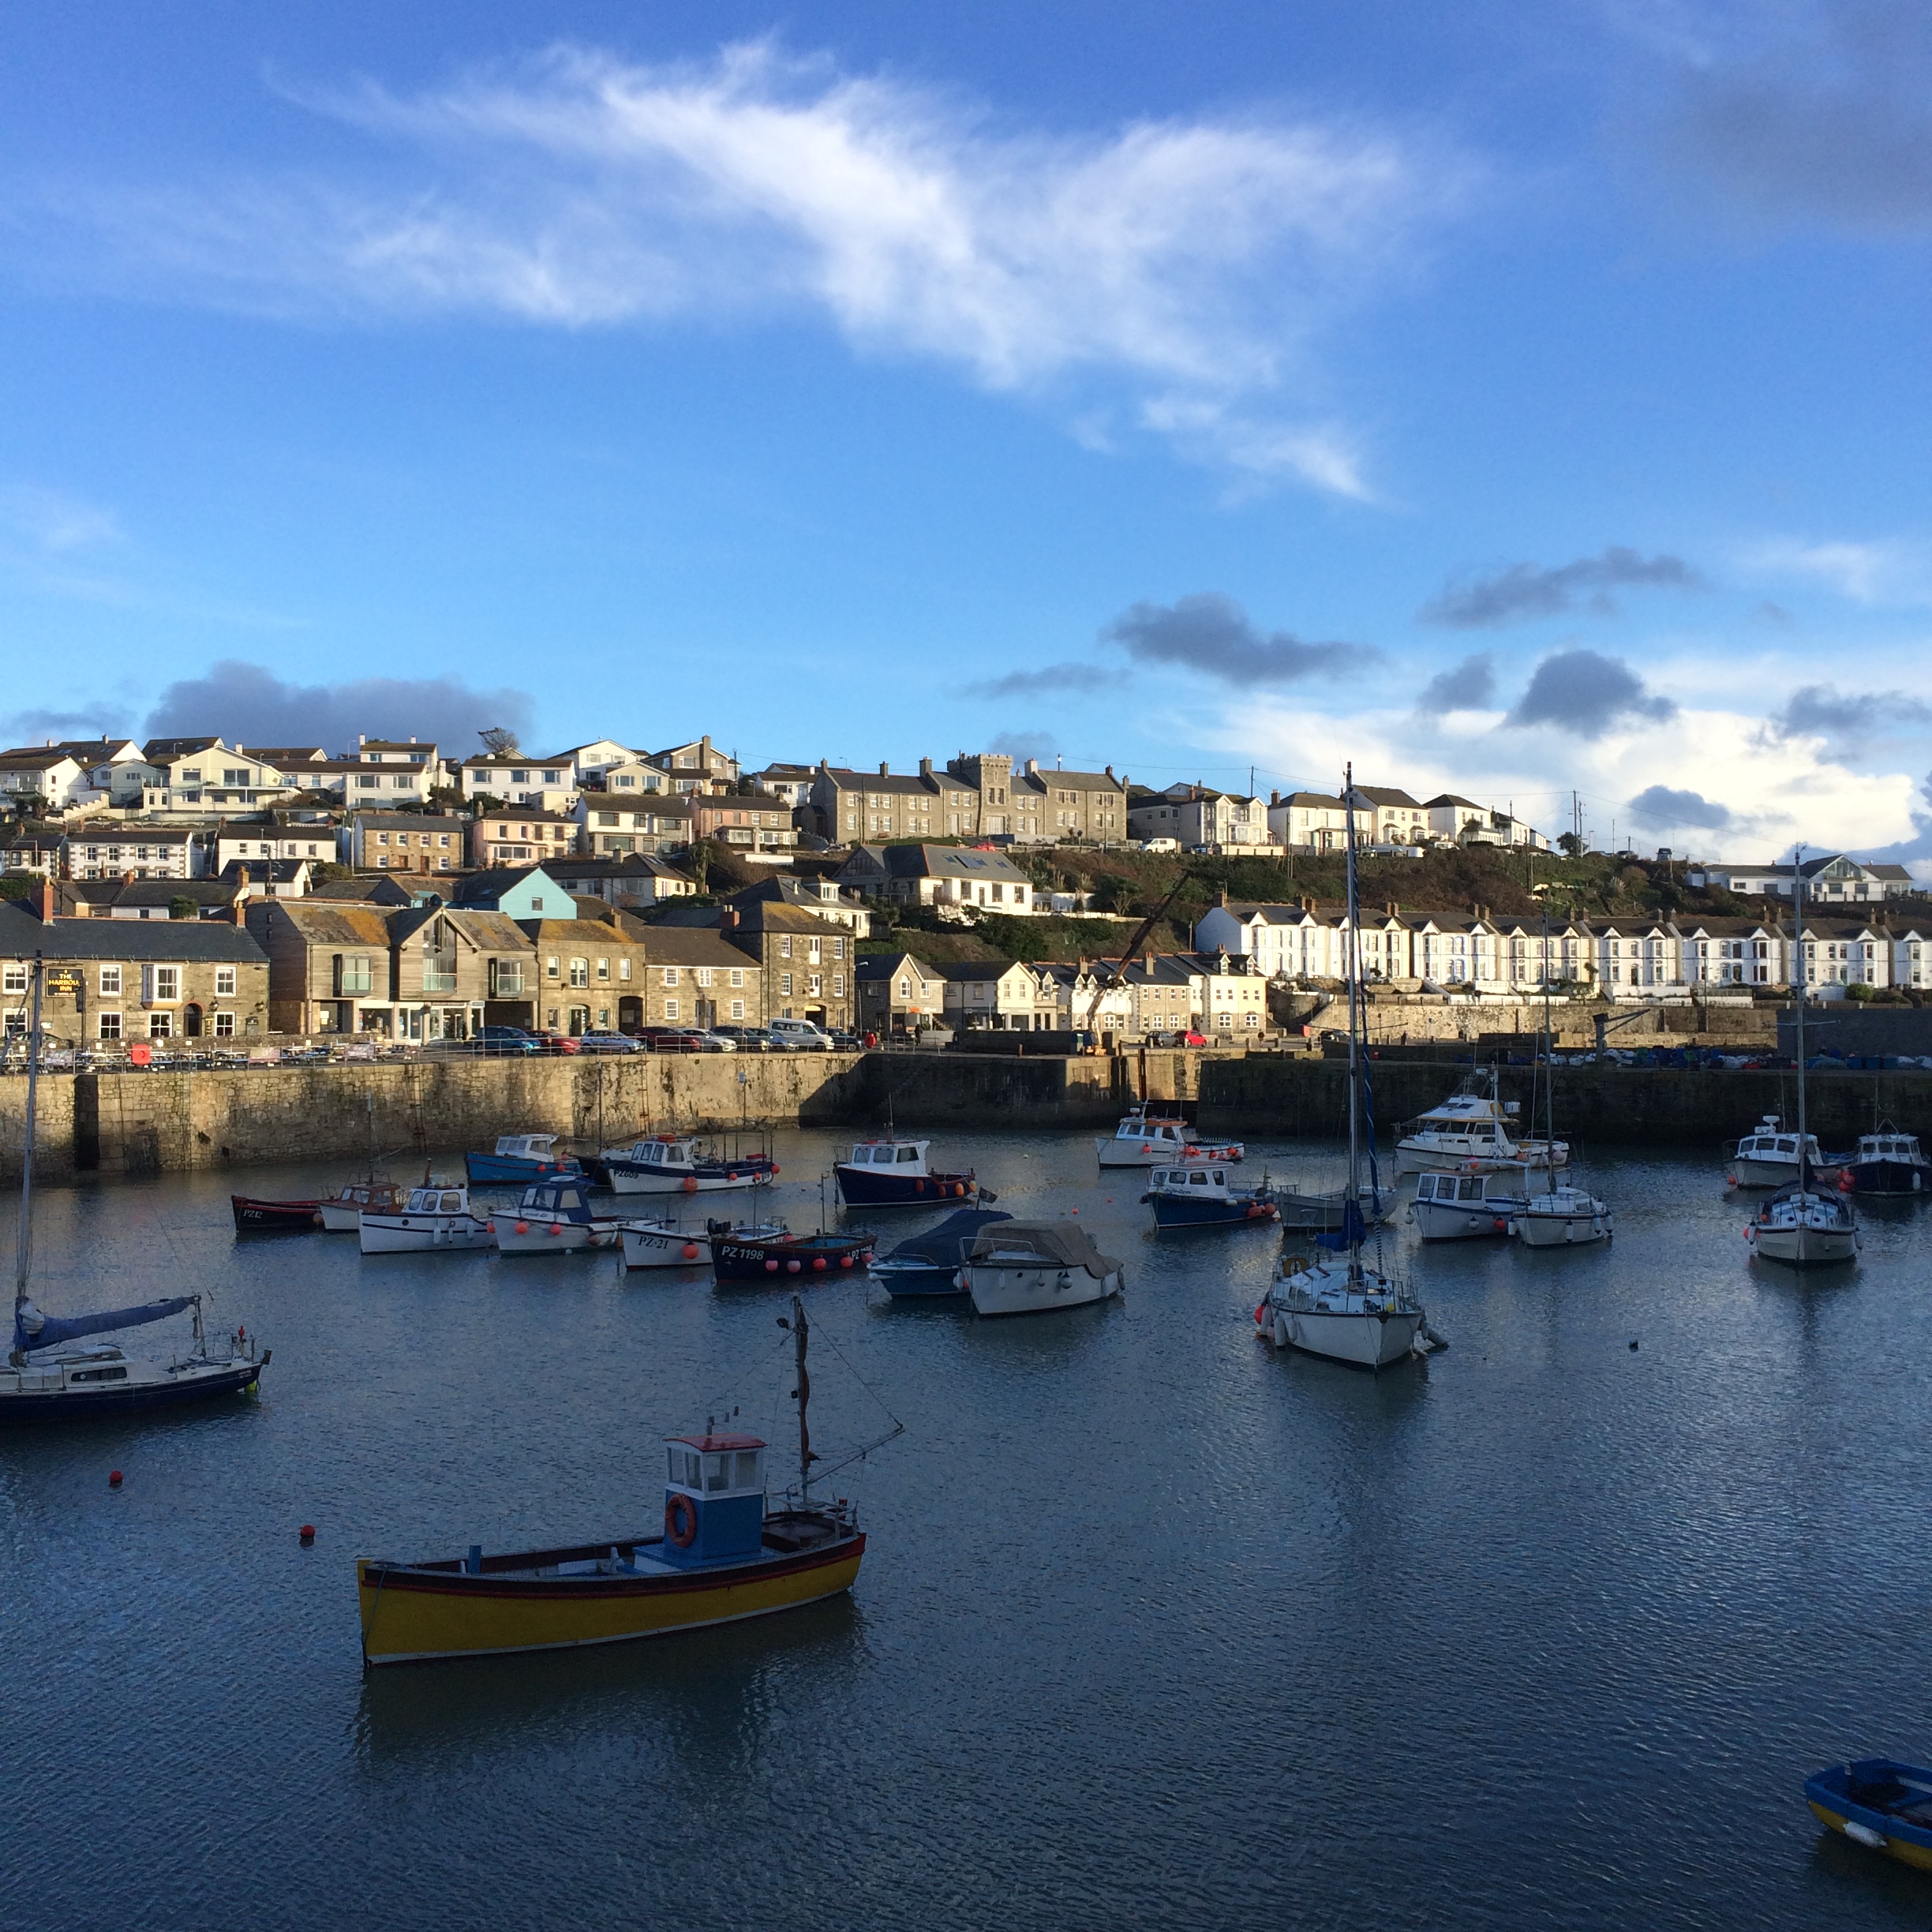 A visit to Helston